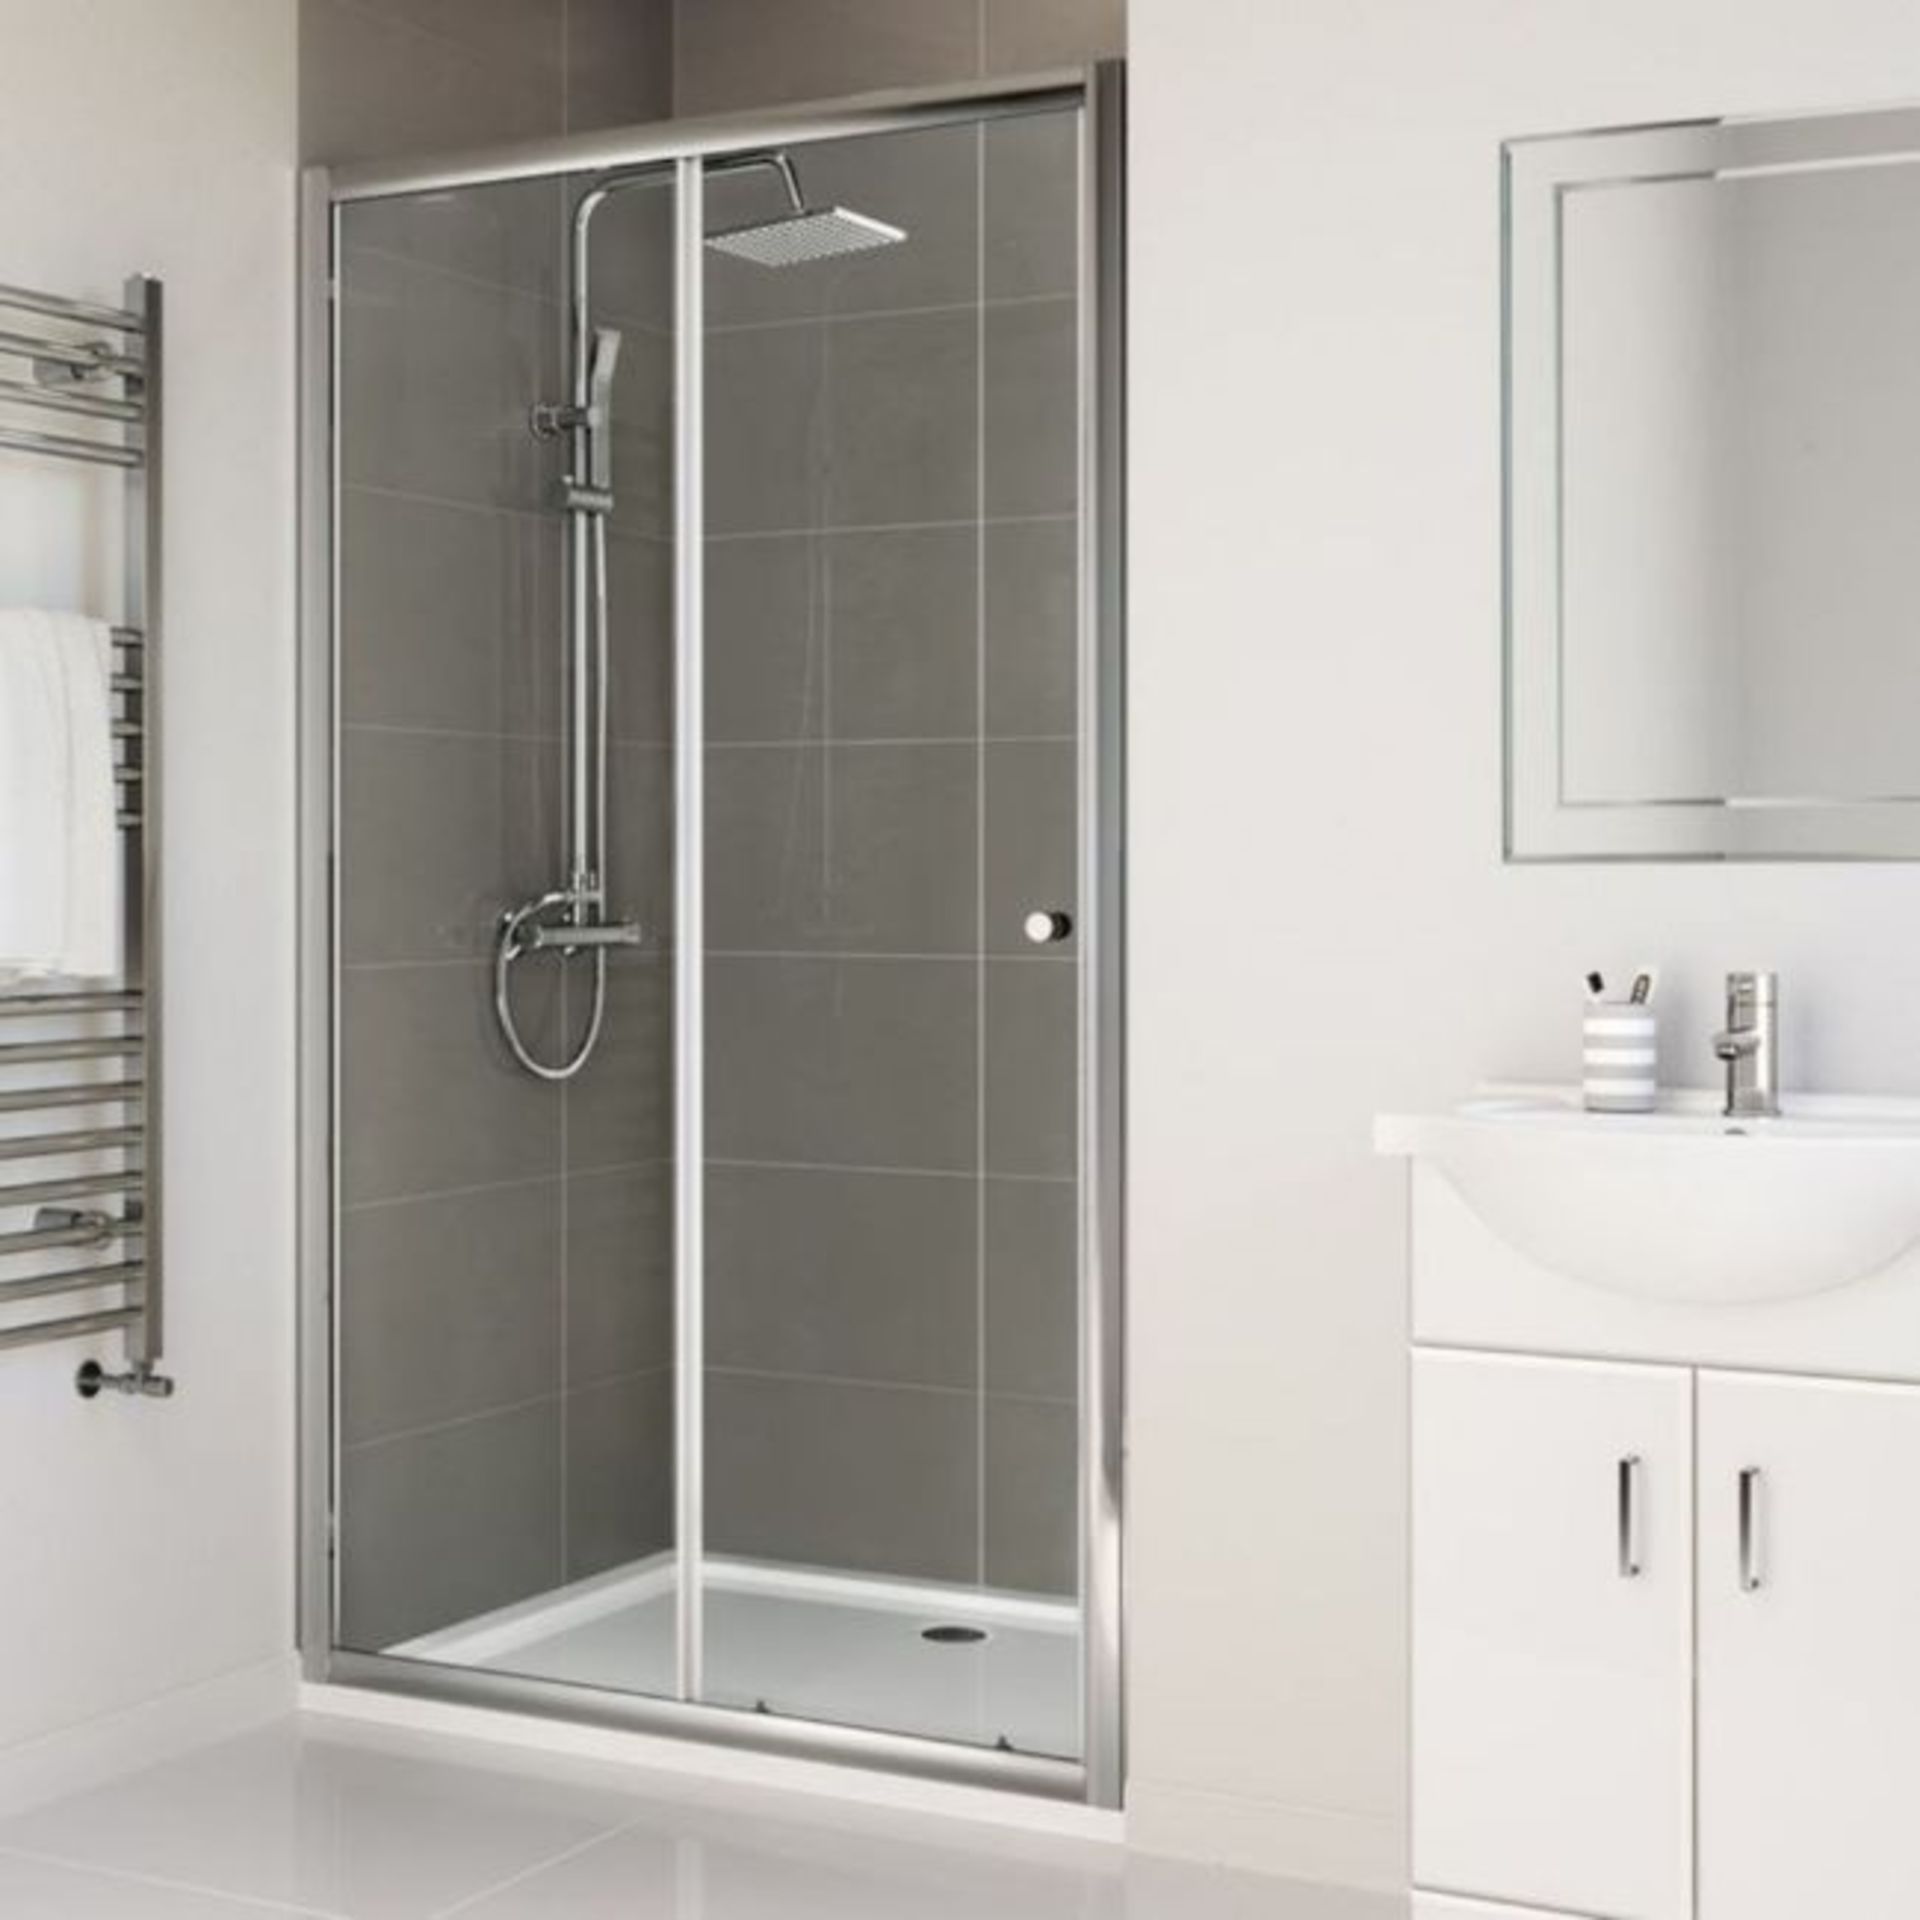 New Twyford's 1600mm - Sliding Shower Door. RRP £399.99.H80500C1+2.6mm Safety Glass Fully Wat...